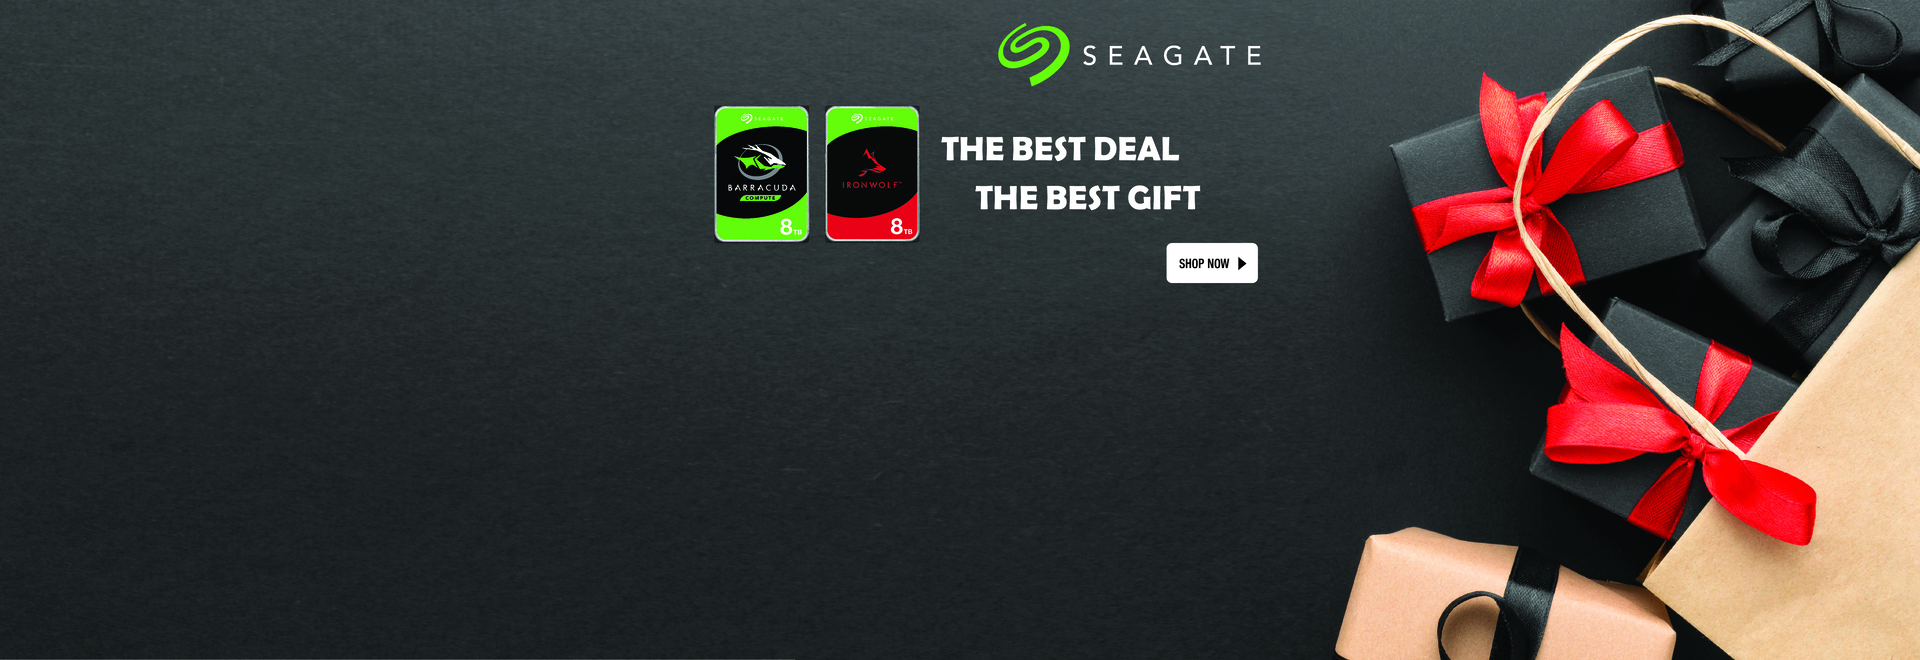  THE BEST DEAL, THE BEST GIFT